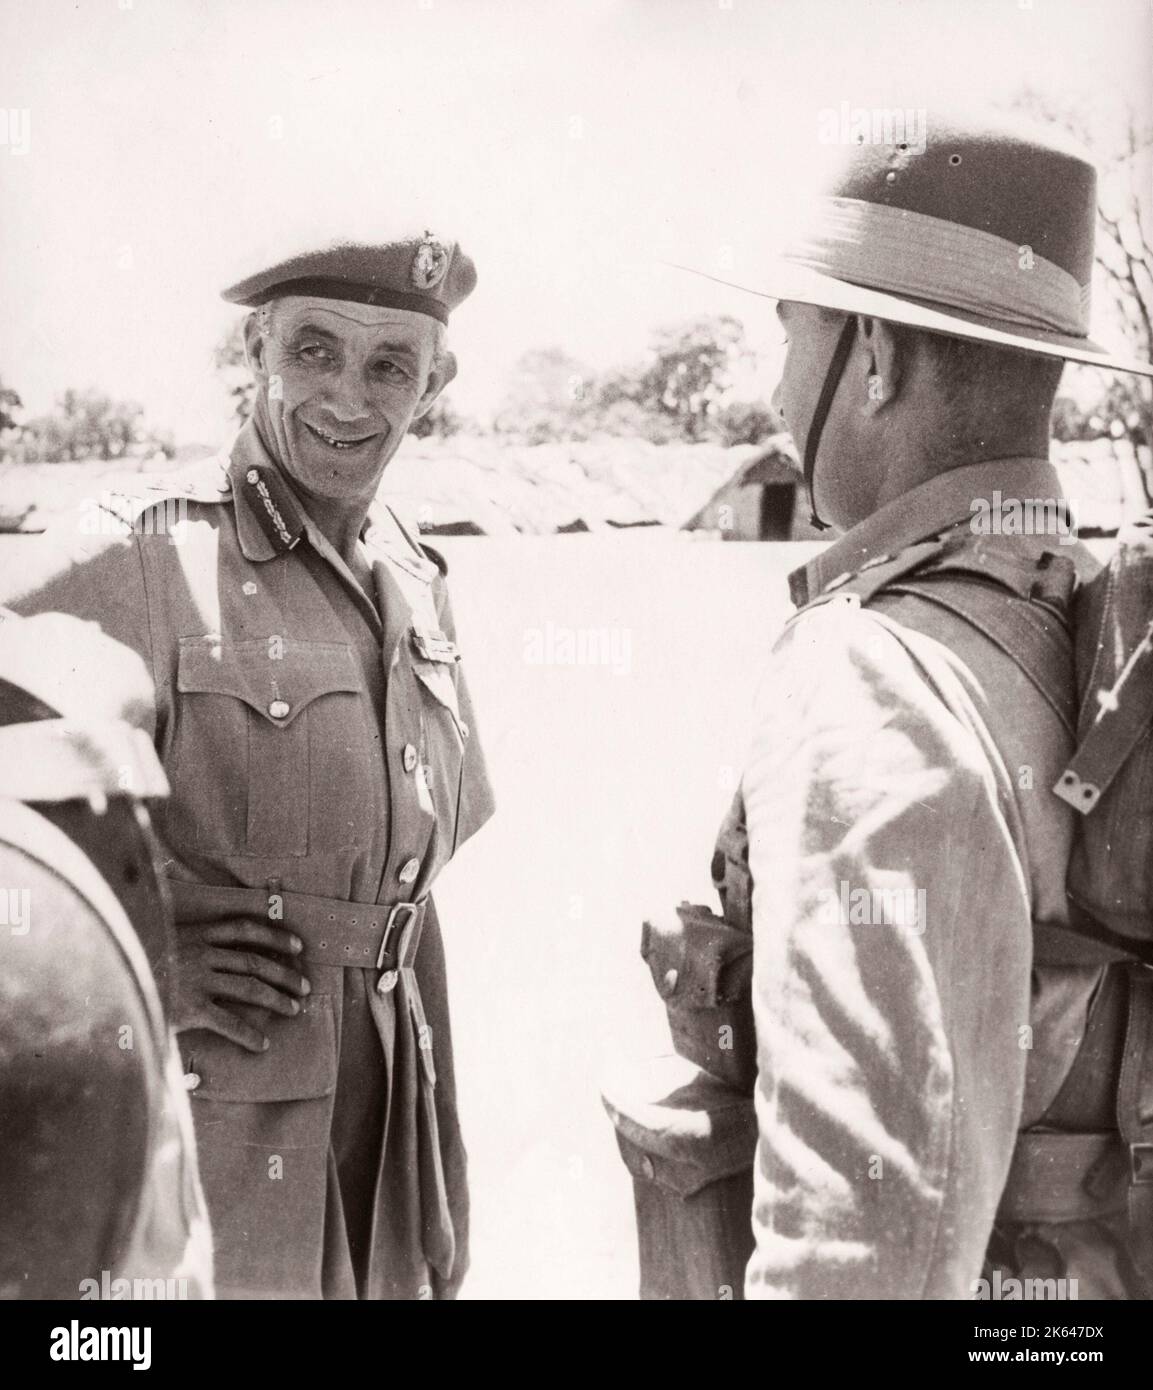 1940s East Africa - General Sir William Platt GOC East Africa Corps Photograph by a British army recruitment officer stationed in East Africa and the Middle East during World War II Stock Photo